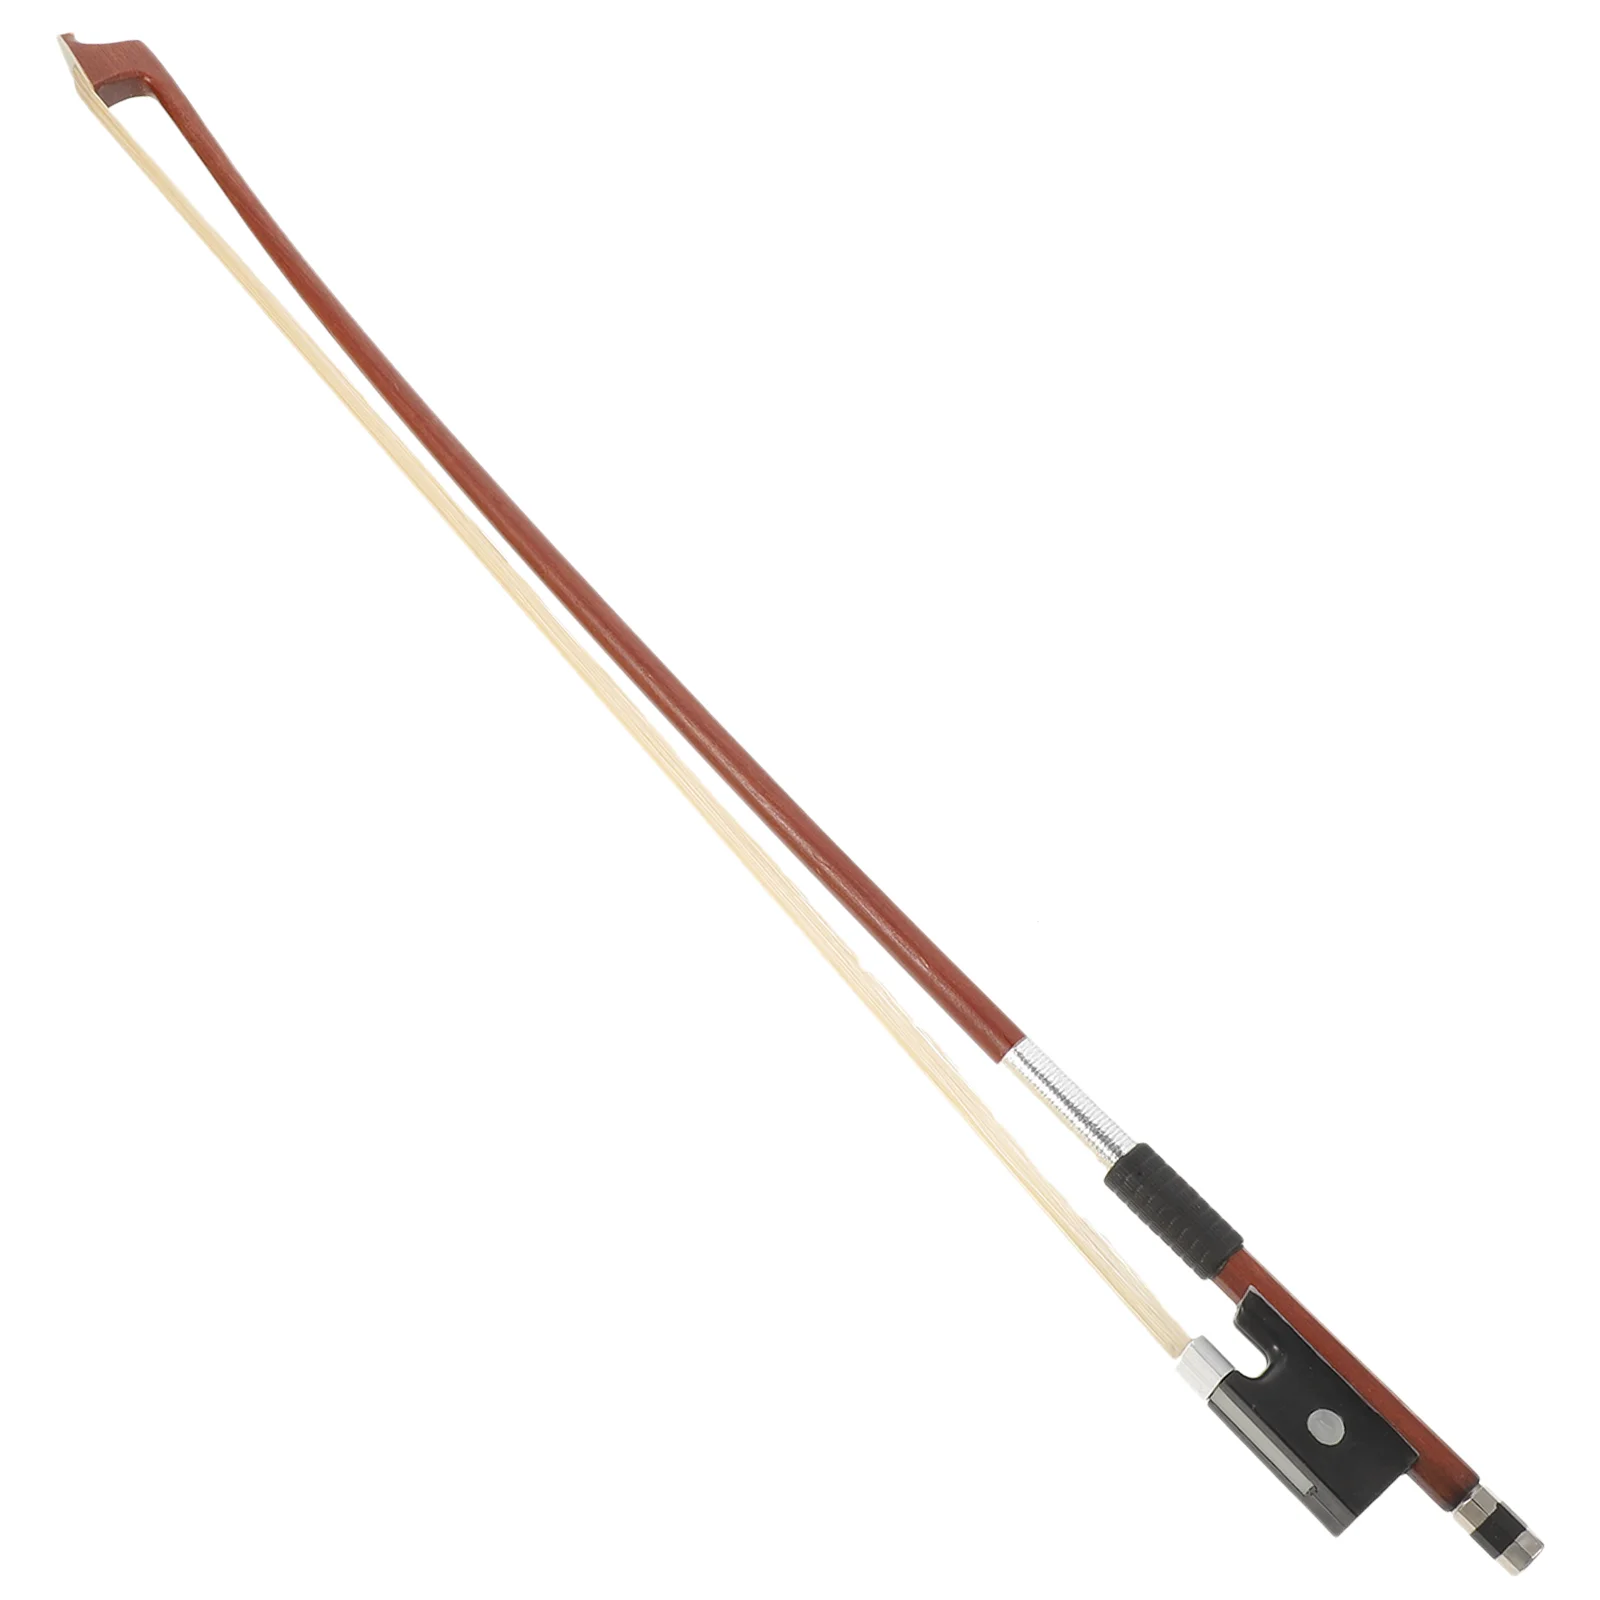 

Violin Bow Performance Grade Pure Horsetail Bow Rod (1/10 1/16 Violin Black Tail Pants Universal Bow) Violin Accessories